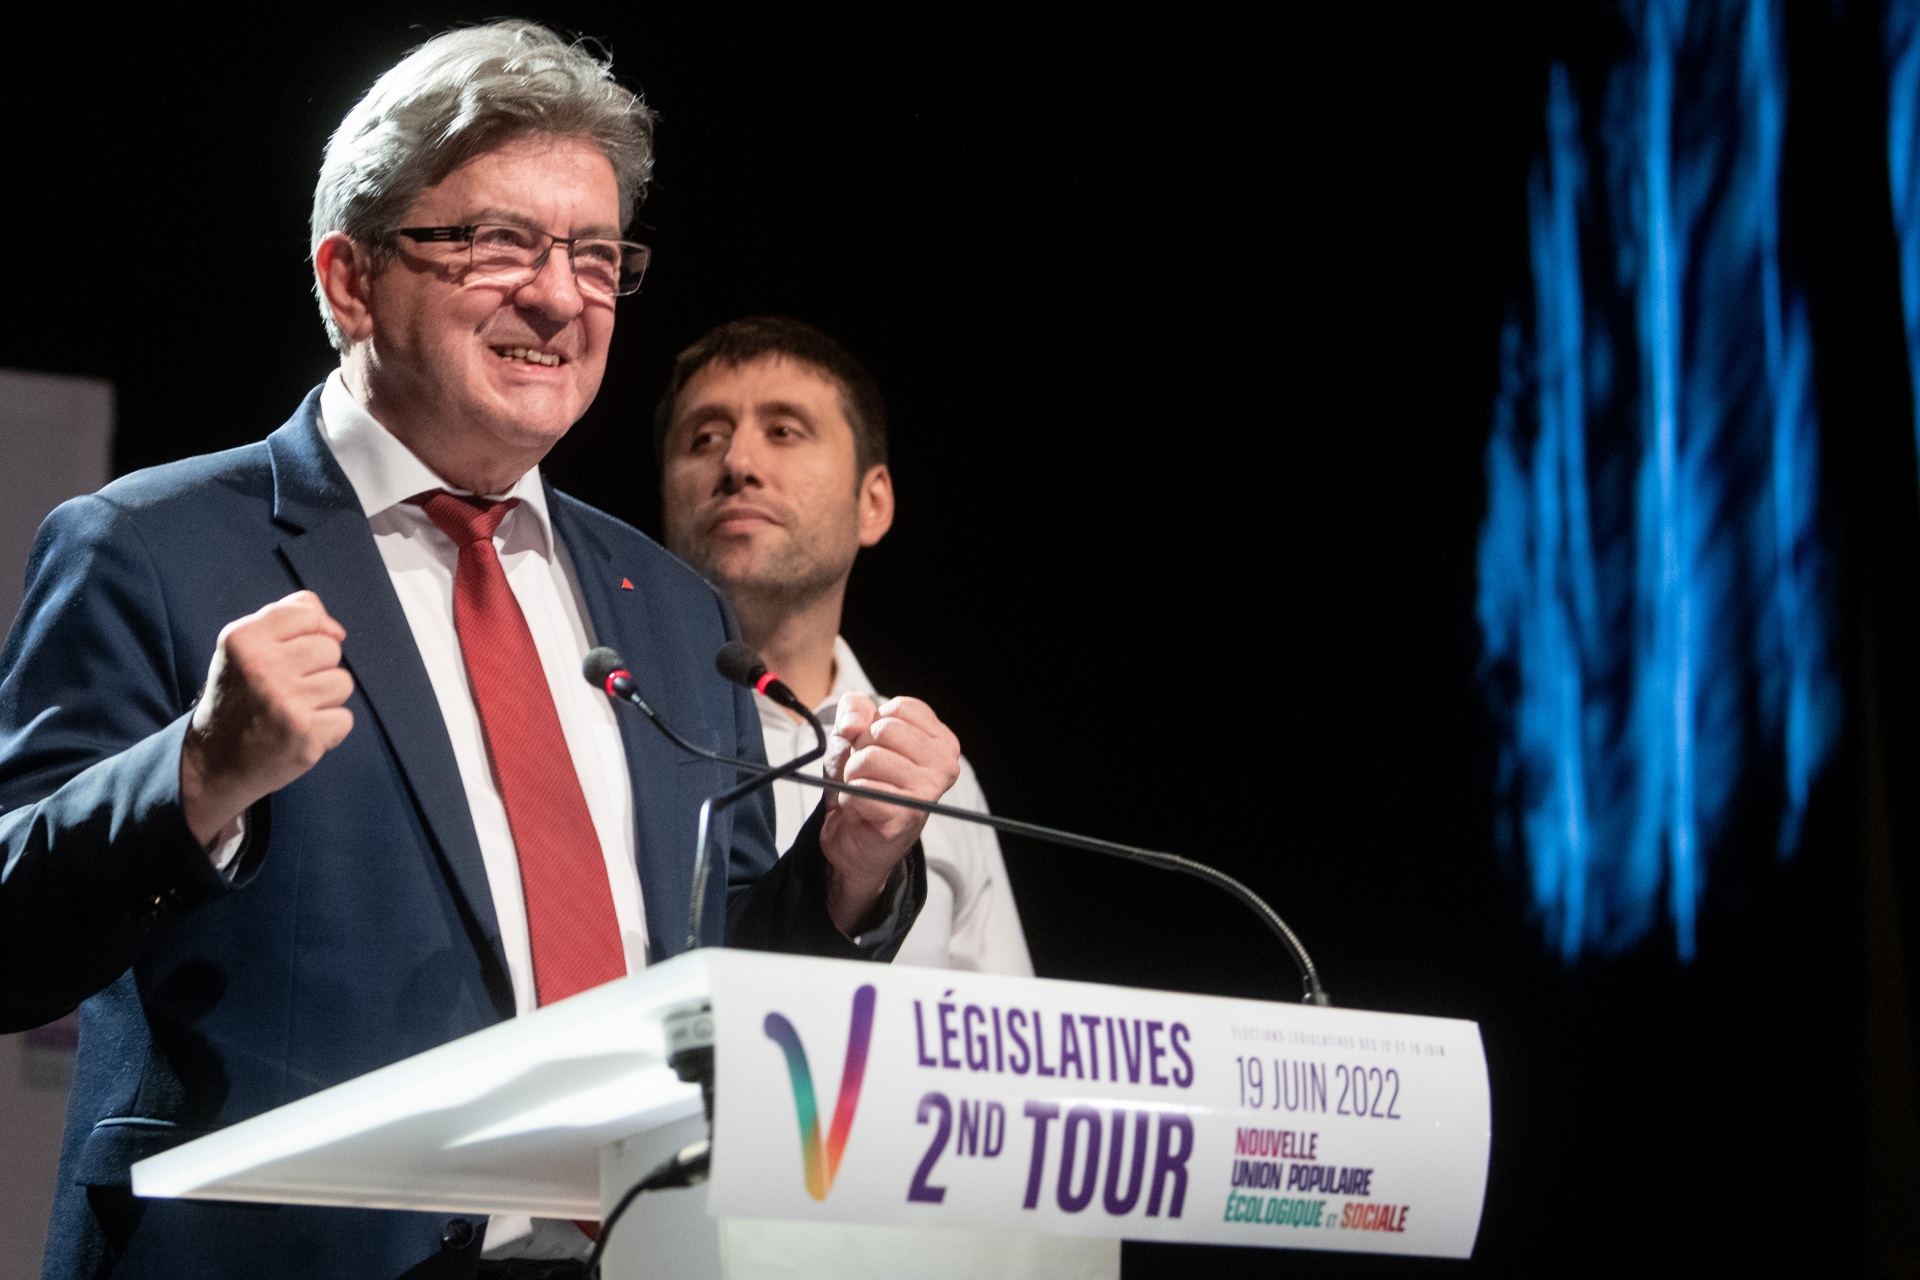 Jean-Luc Melenchon, leader of the France Unbowed party, speaks during an election night event, following the first round of voting in parliamentary elections, in Paris, France, on Sunday, June 19, 2022. President Emmanuel Macron is set to lose absolute majority in parliament as the far-right coalition surges, with the second-largest group on track to be Nupes, a leftist coalition led by Melenchon. Photographer: Benjamin Girette/Bloomberg via Getty Images